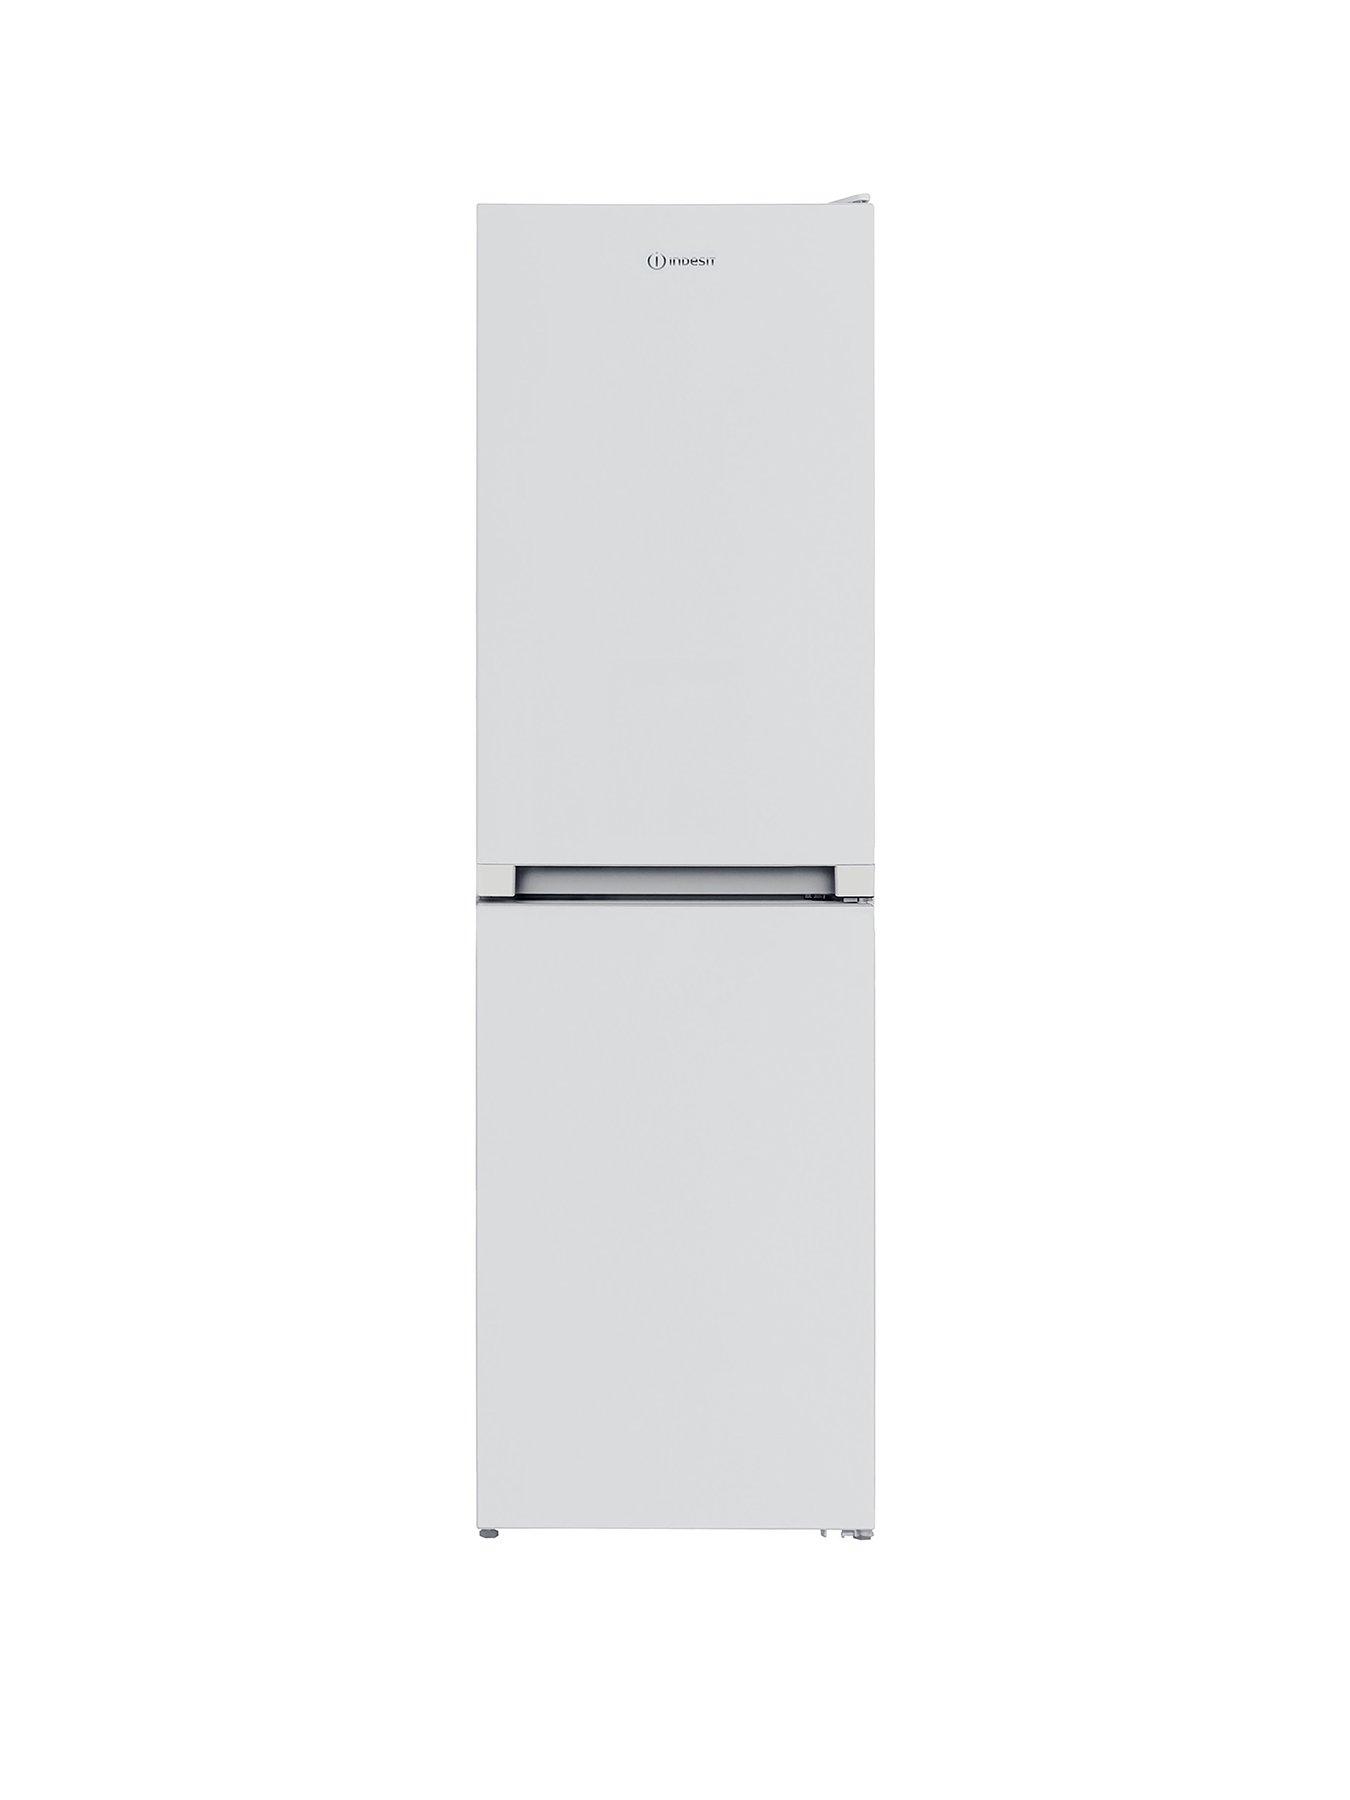 Product photograph of Indesit No Frost Ibnf55182wuk Fridge Freezer - White from very.co.uk